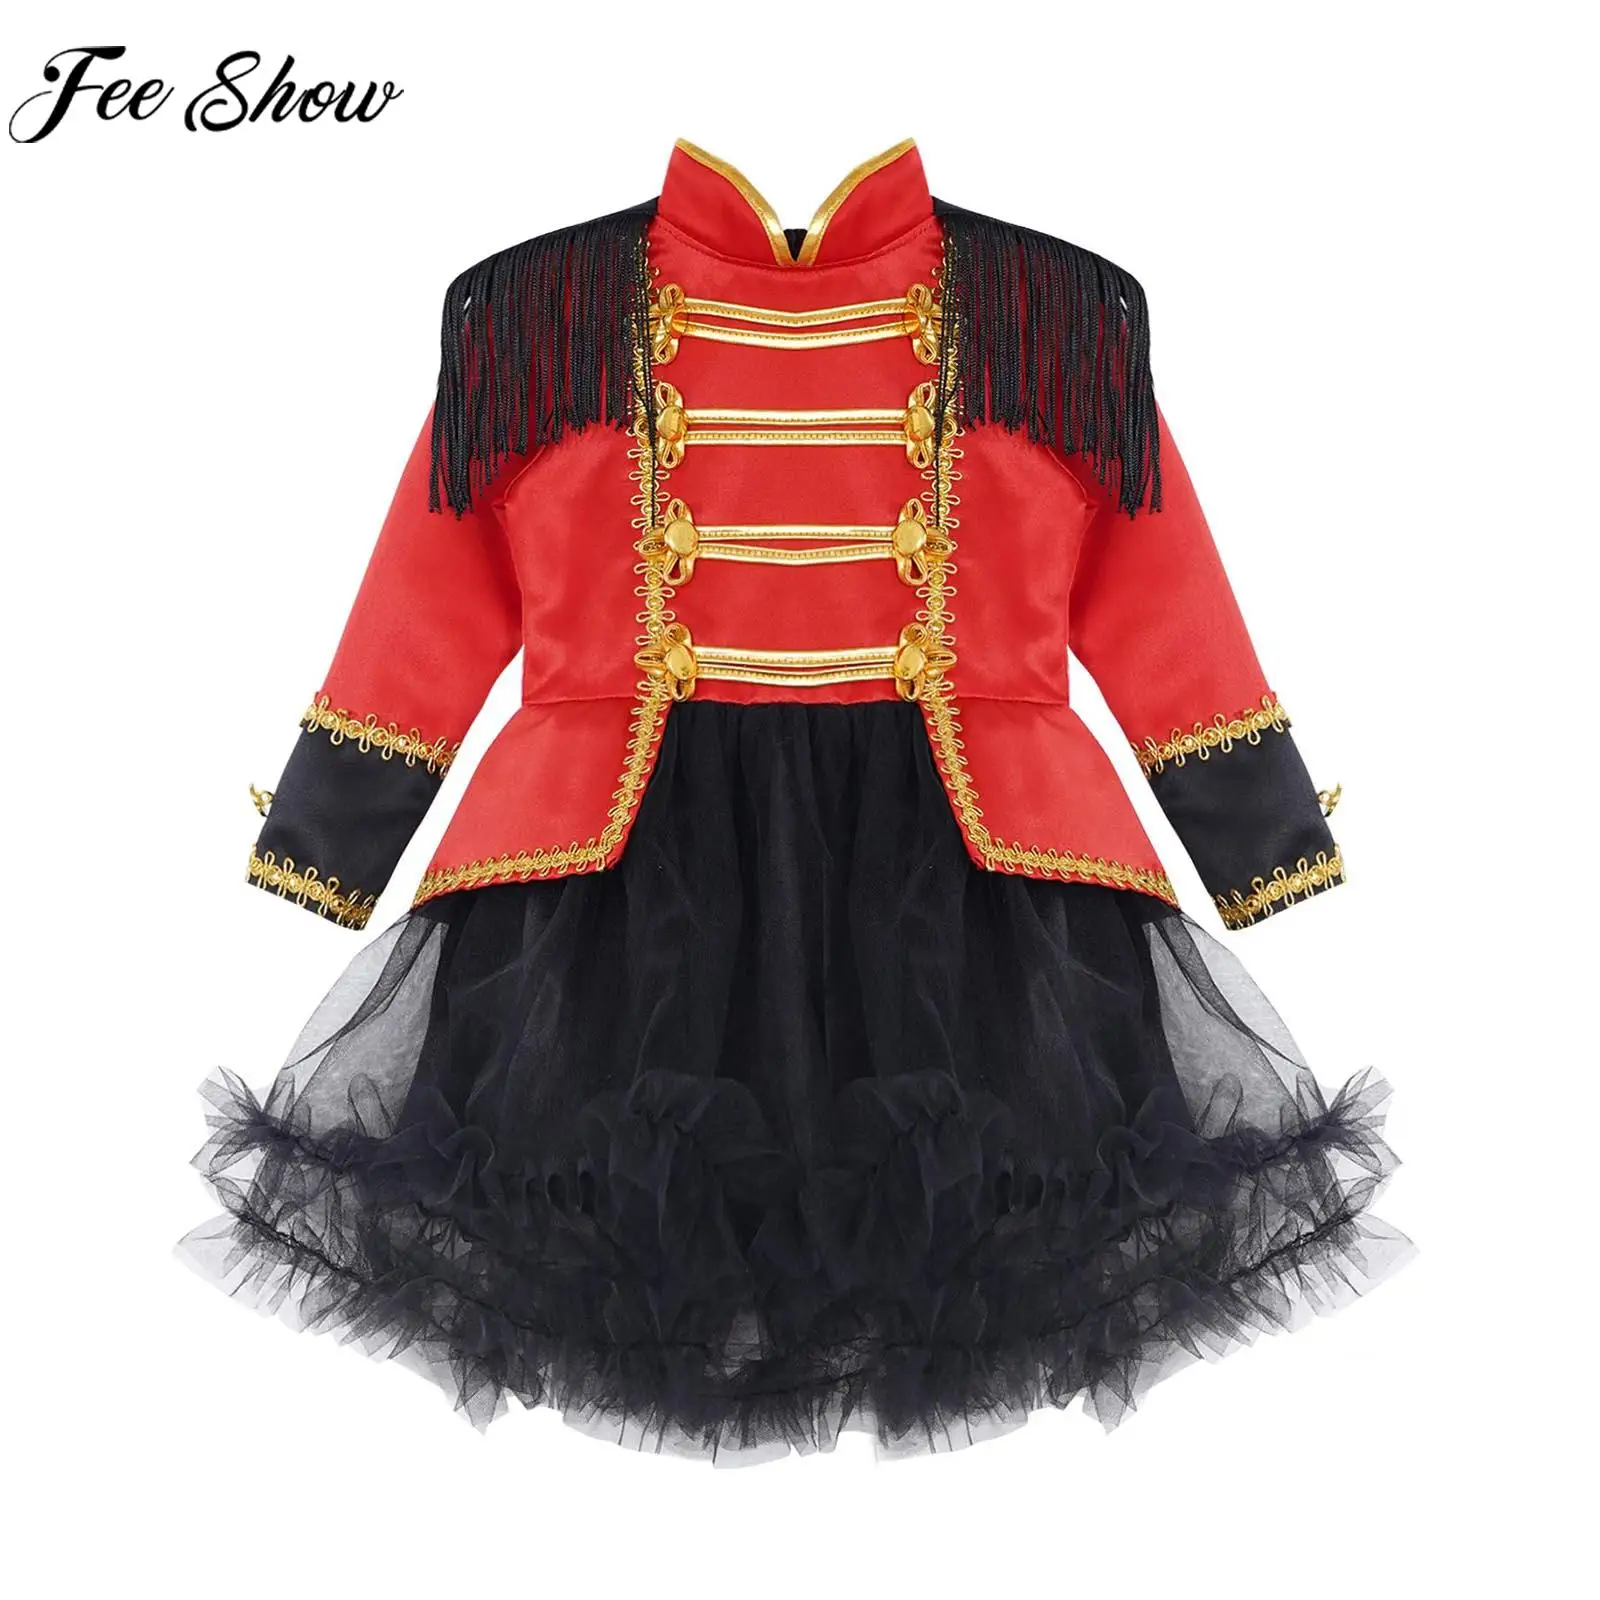 3M-4T Toddler Girls Circus Cosplay Costume Long Sleeve Tassels Mesh Tutu Dress for Carnival Performance Halloween Theme Party